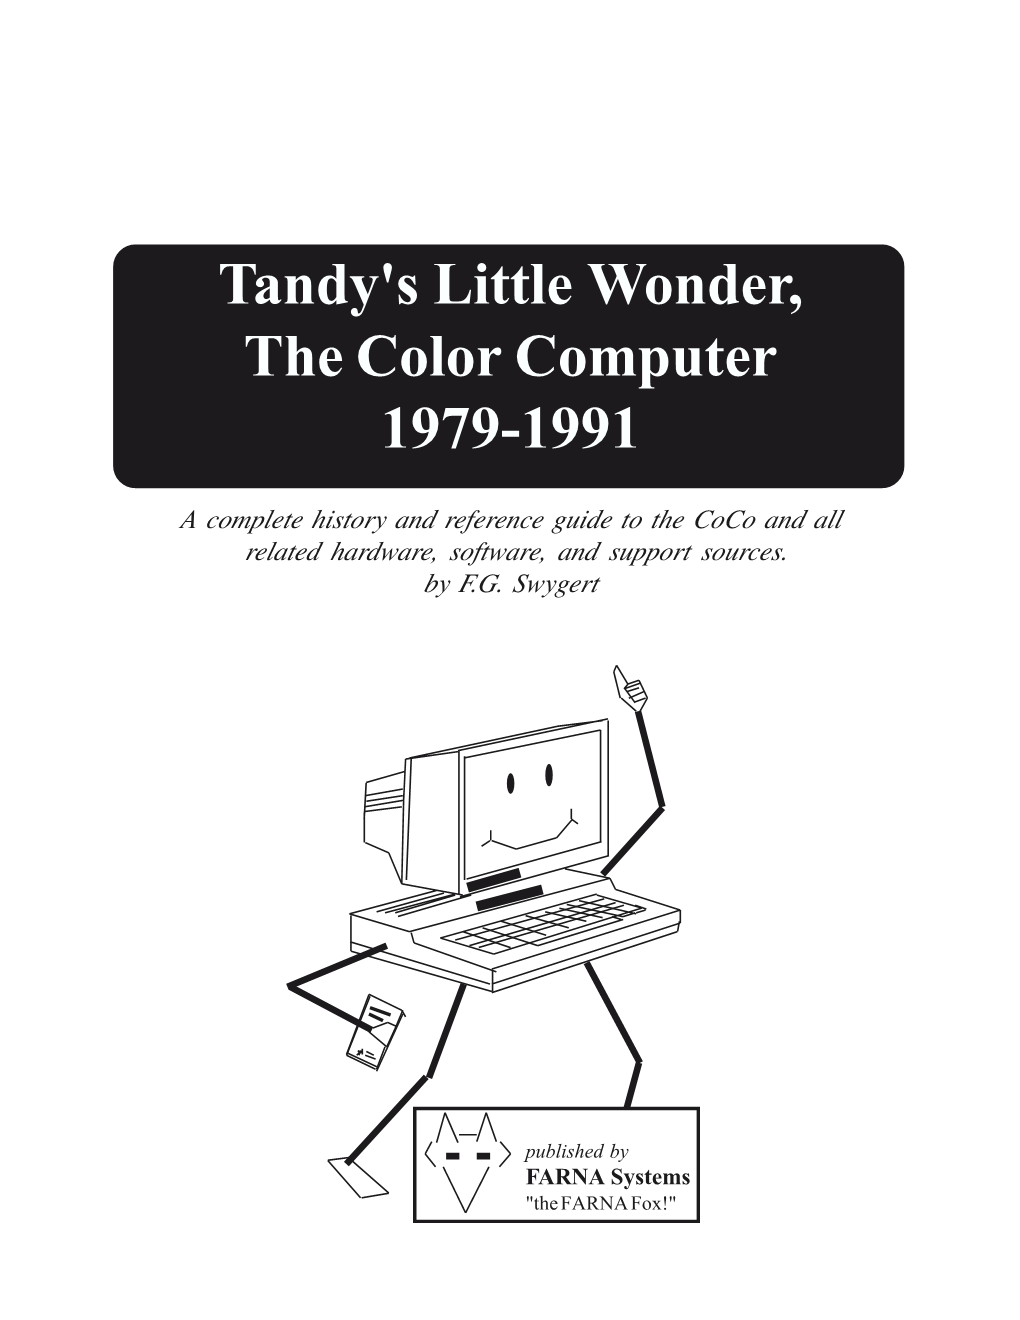 Tandy's Little Wonder, the Color Computer 1979-1991